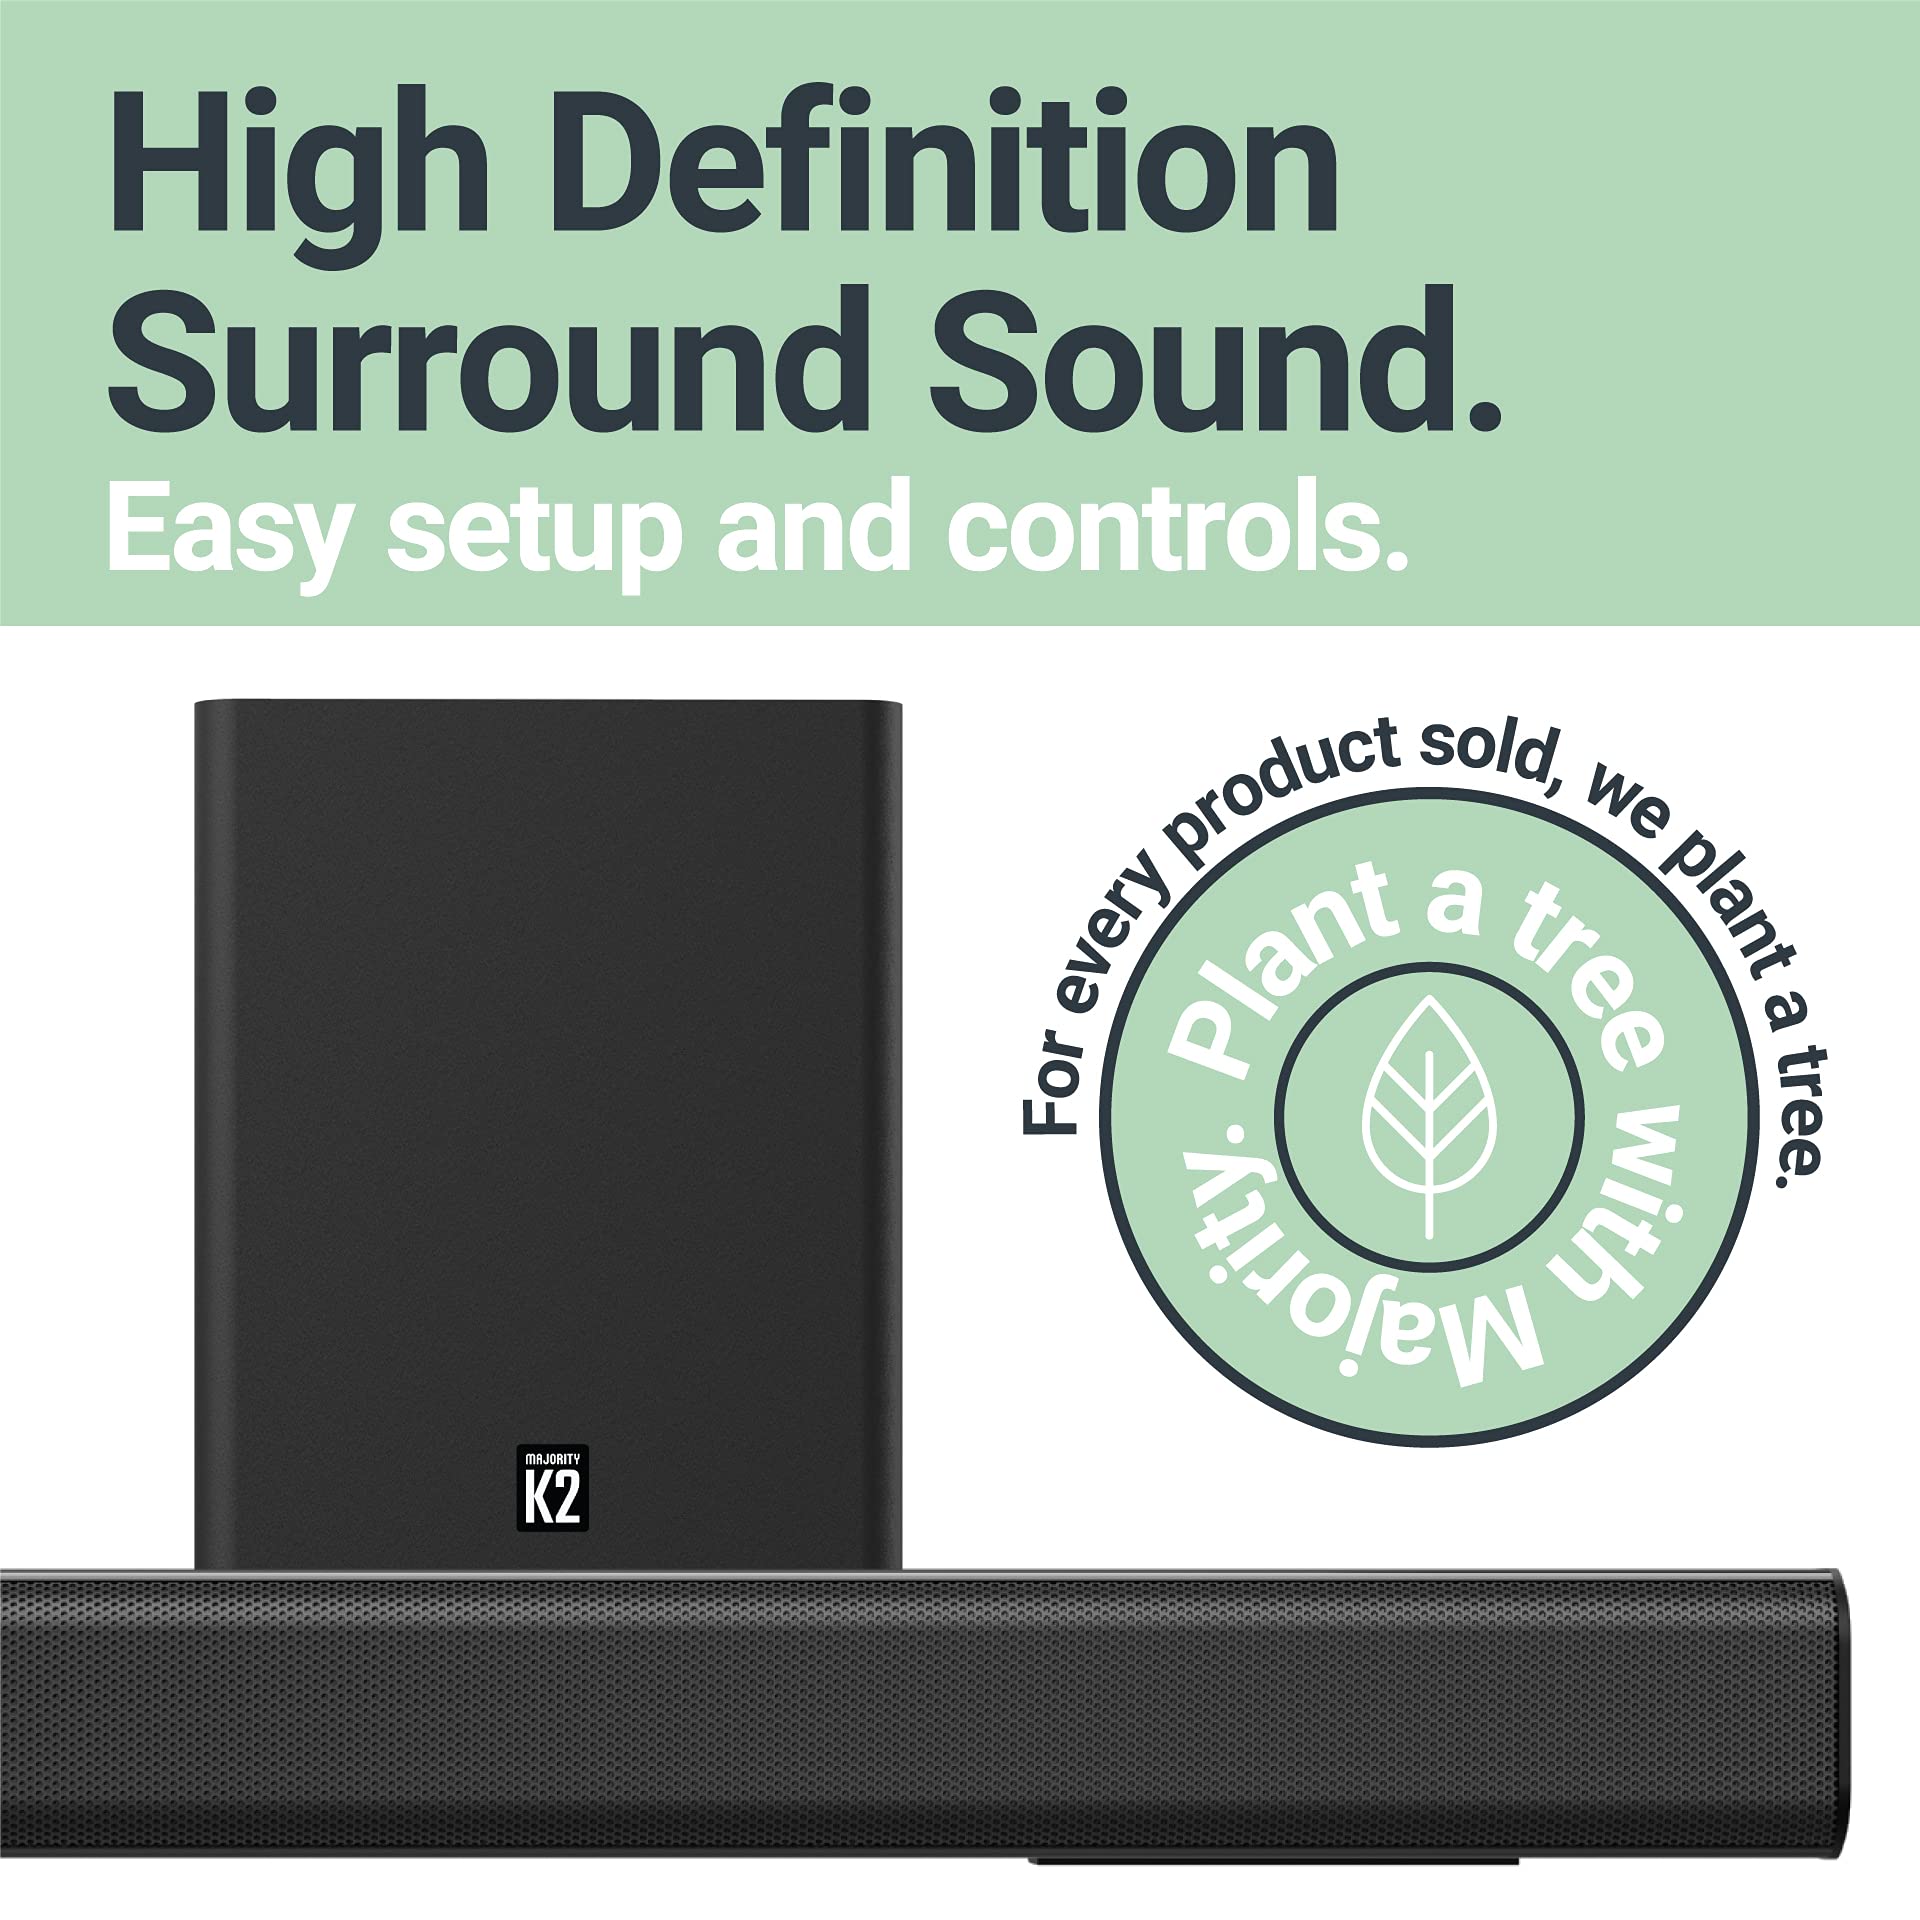 Majority K2 Sound Bar with Subwoofer | 150W Powerful Stereo 2.1 Channel Sound Bar for TV | Home Theatre 3D Surround Sound I HDMI ARC, Bluetooth, Optical & RCA Connection I USB & AUX Playback | Black